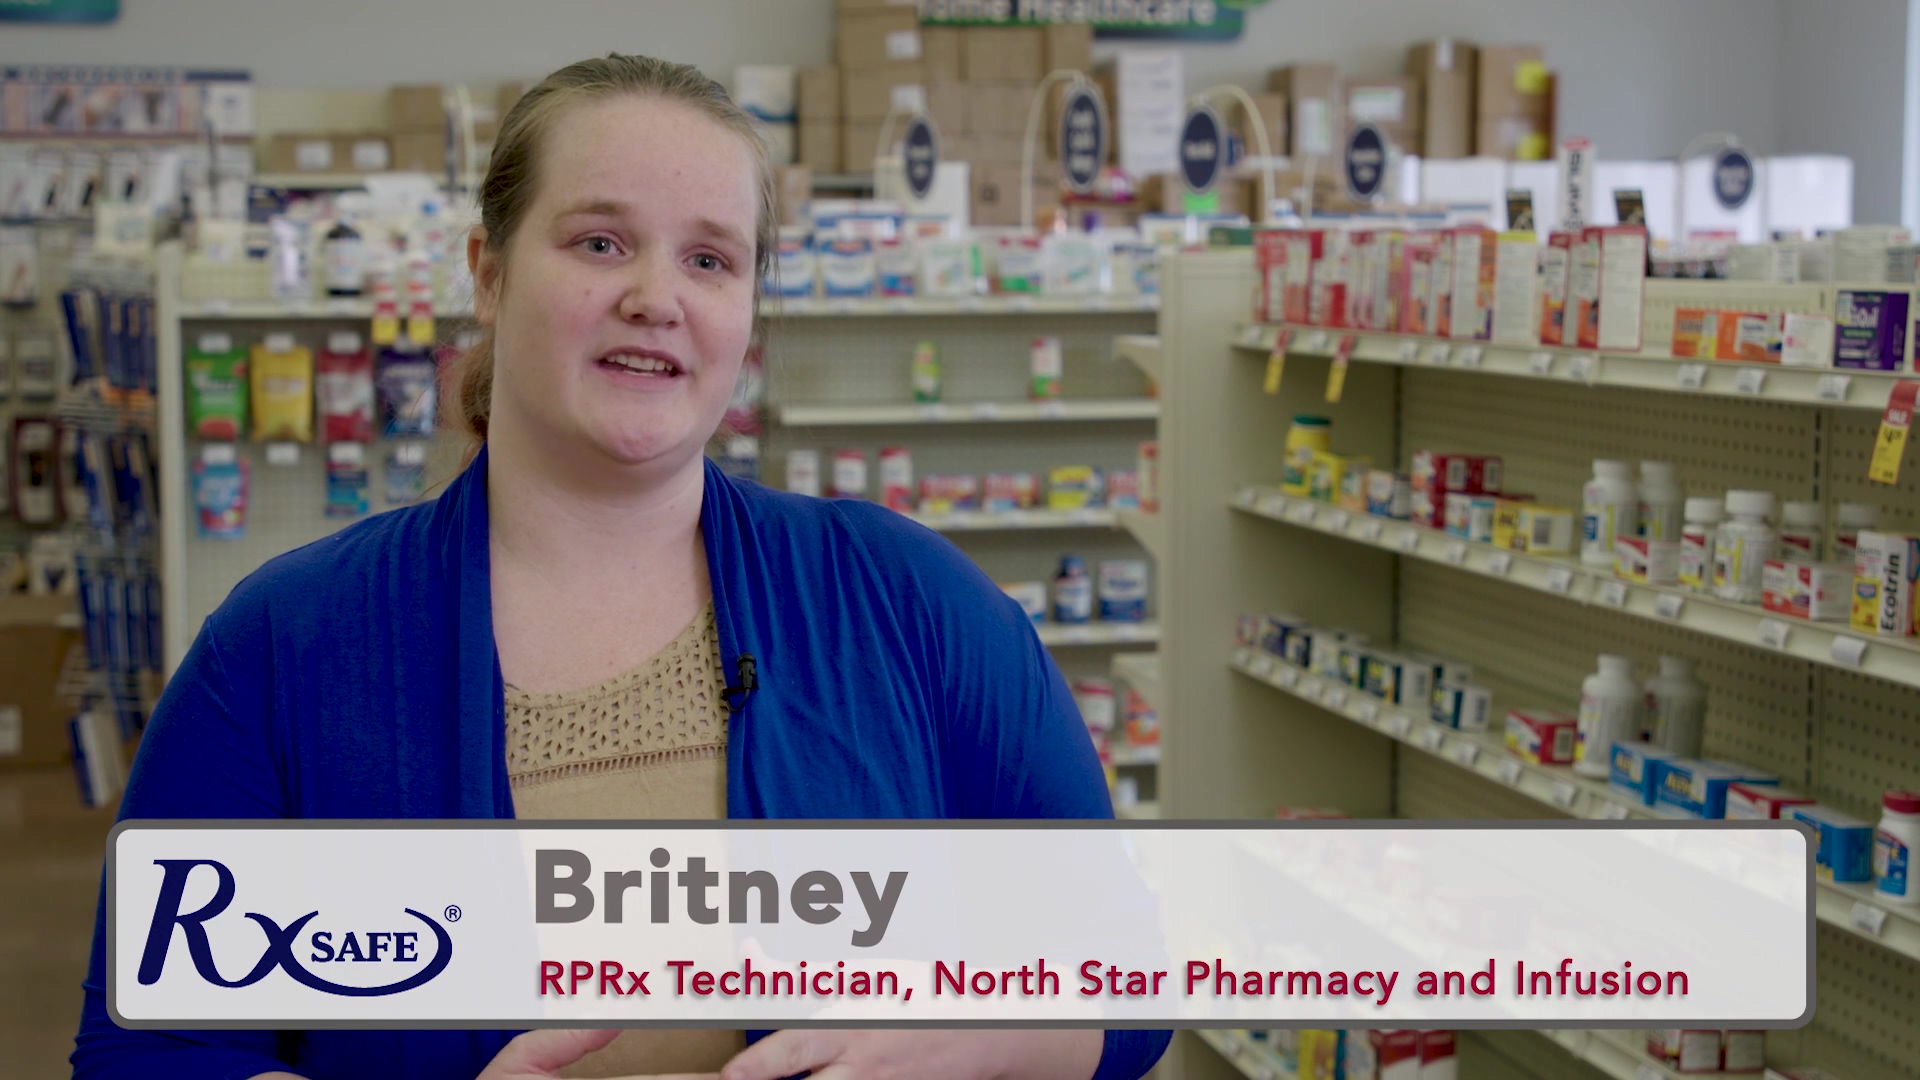 North Star Infusion - Britney - Pharmacy Tech Interview  Edit 02a-